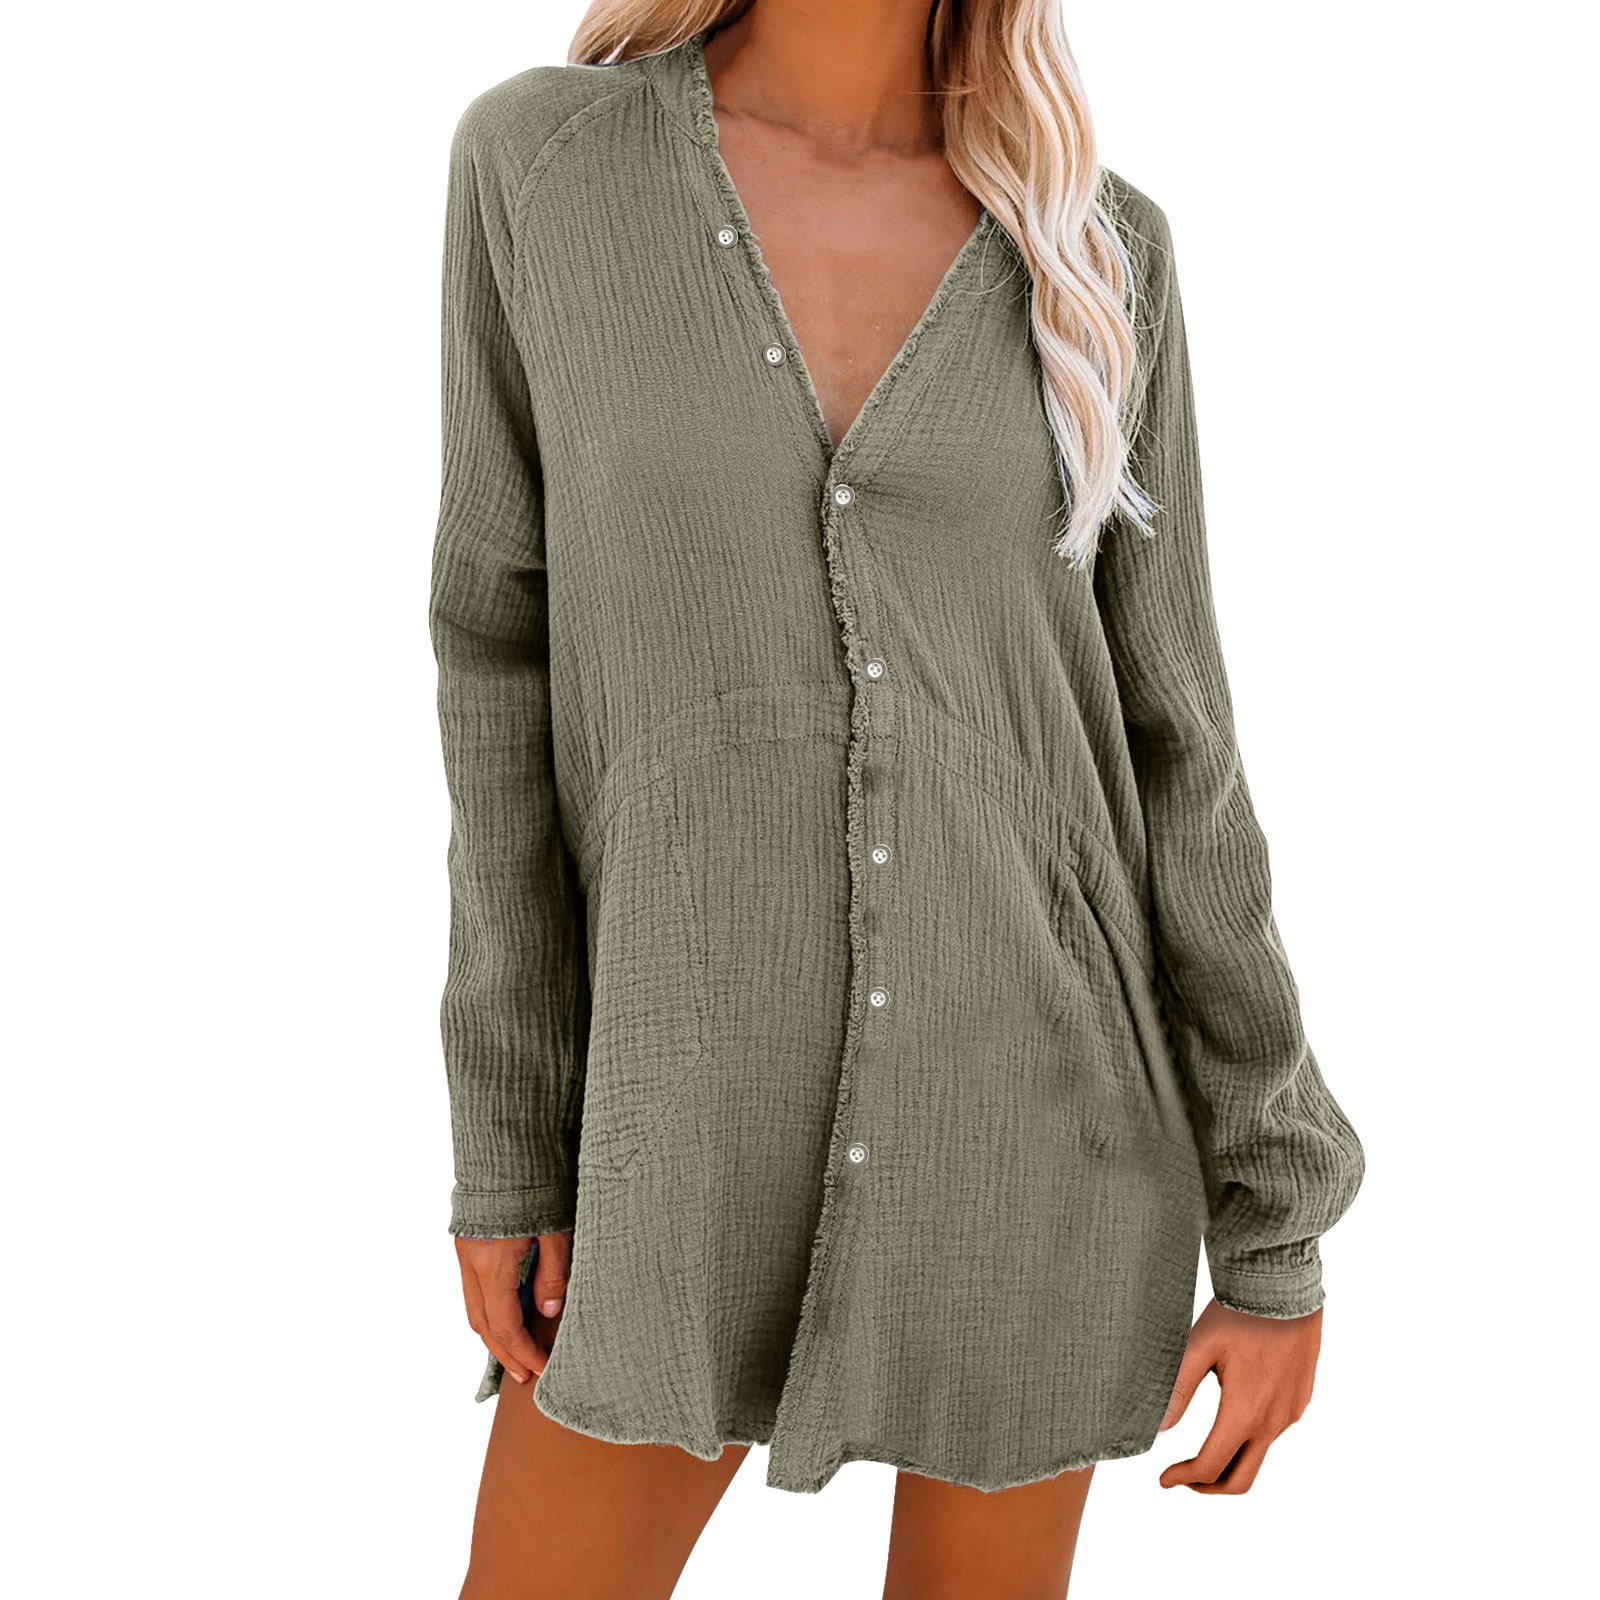 ZRBYWB Blouses For Women Linen Shacket Long Sleeve Button Down Collared  Shirt Jacket Tops Dress Womens Shirts